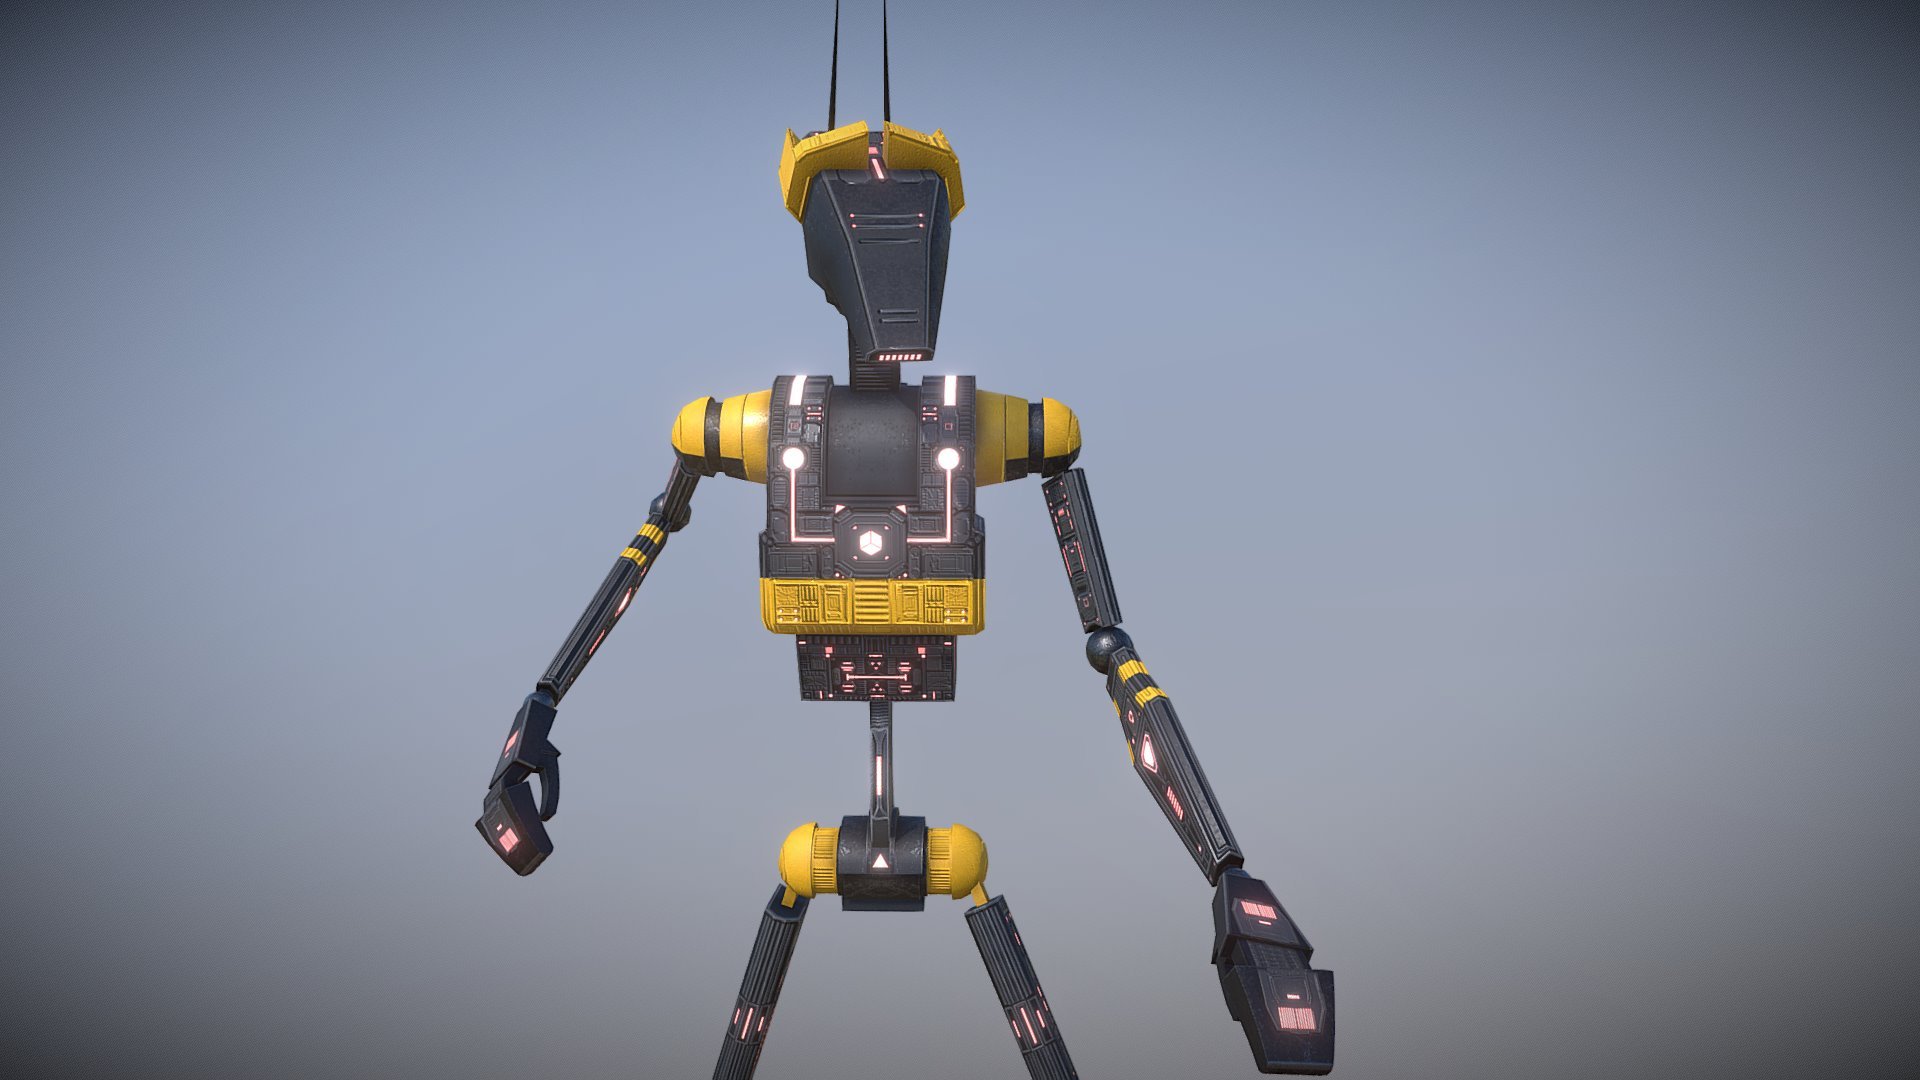 Galaxy Robots


Preview here: https://www.artstation.com/artwork/k4E3wz




Rigged

Animated (21 animations)

-Rifle_Idle

-Rifle_Jump

-Rifle_Run

-Rifle_Shoot

-Rifle_Stand

-Rifle_Walk

-Unarmed_Death_1

-Unarmed_Death_2

-Unarmed_Falling

-Unarmed_Idle_1

-Unarmed_Idle_2

-Unarmed_Idle_3

-Unarmed_Jump_1

-Unarmed_Meditation

-Unarmed_Playing_Guitar

-Unarmed_Punch

-Unarmed_Punch_2

-Unarmed_Run

-Unarmed_Run_2

-Unarmed_Stand

-Unarmed_Walk



1 Robot:

6.6k Triangles

3.6k Vertices

Dummy Gun:

272 Triangles

156 Vertices



3 material versions Textures:

3- 2048x2048 AlbedoTransparency Texture Map

3- 2048x2048 Normal Texture Map

3- 2048x2048 MetallicSmoothness Texture Map

3- 2048x2048 Emission Texture Map
 - Galaxy Robots Pack v1 - 3D model by Mr. Galaxy (@Gleb_Volkov) 3d model